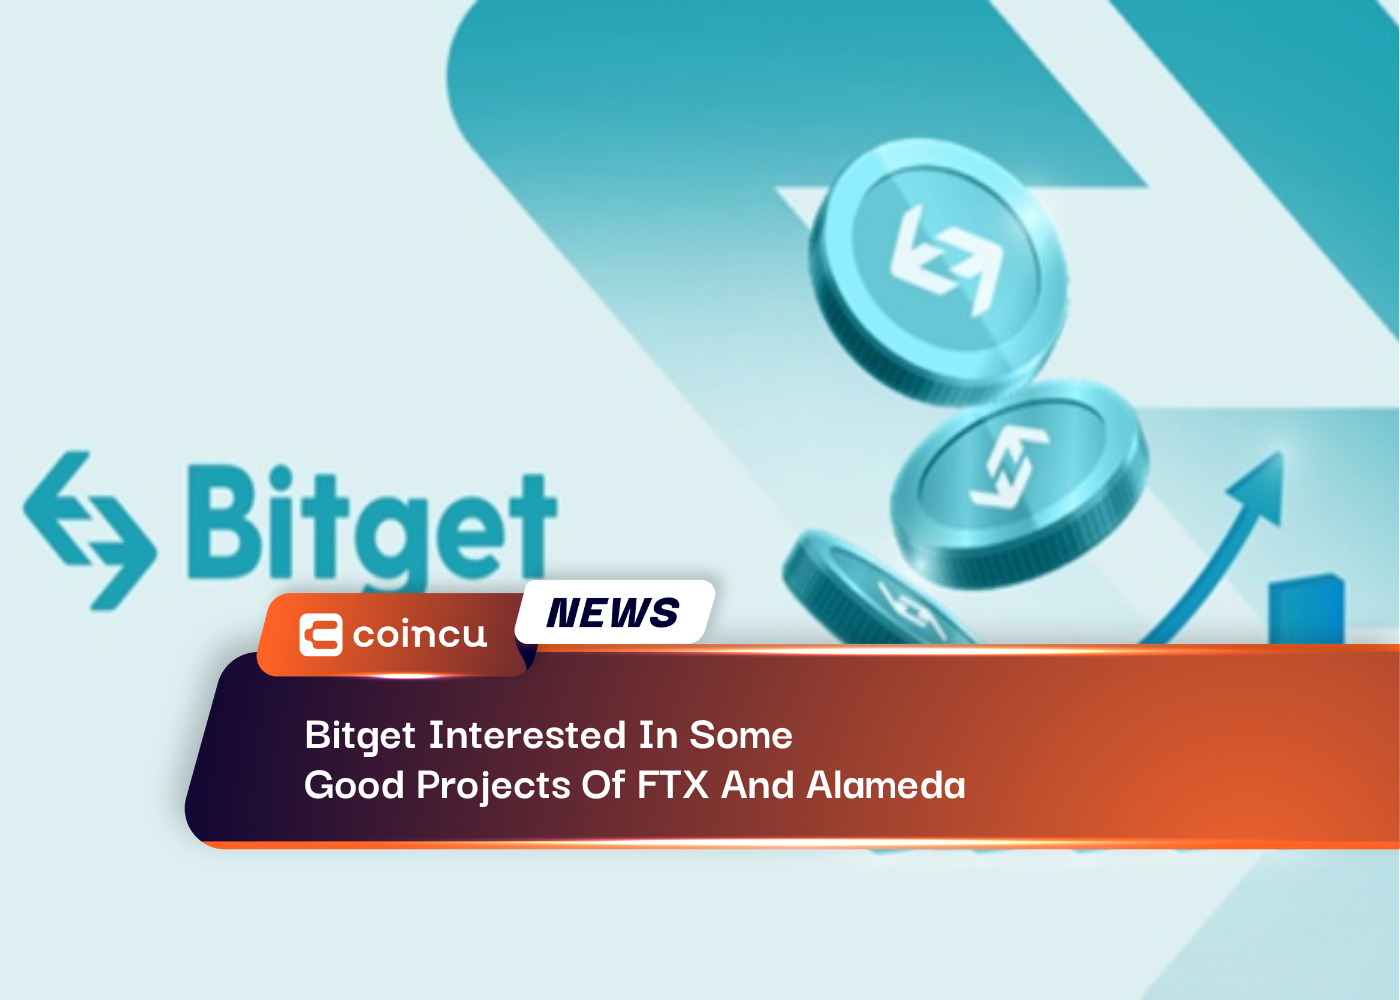 Bitget Interested In Some Good Projects Of FTX And Alameda